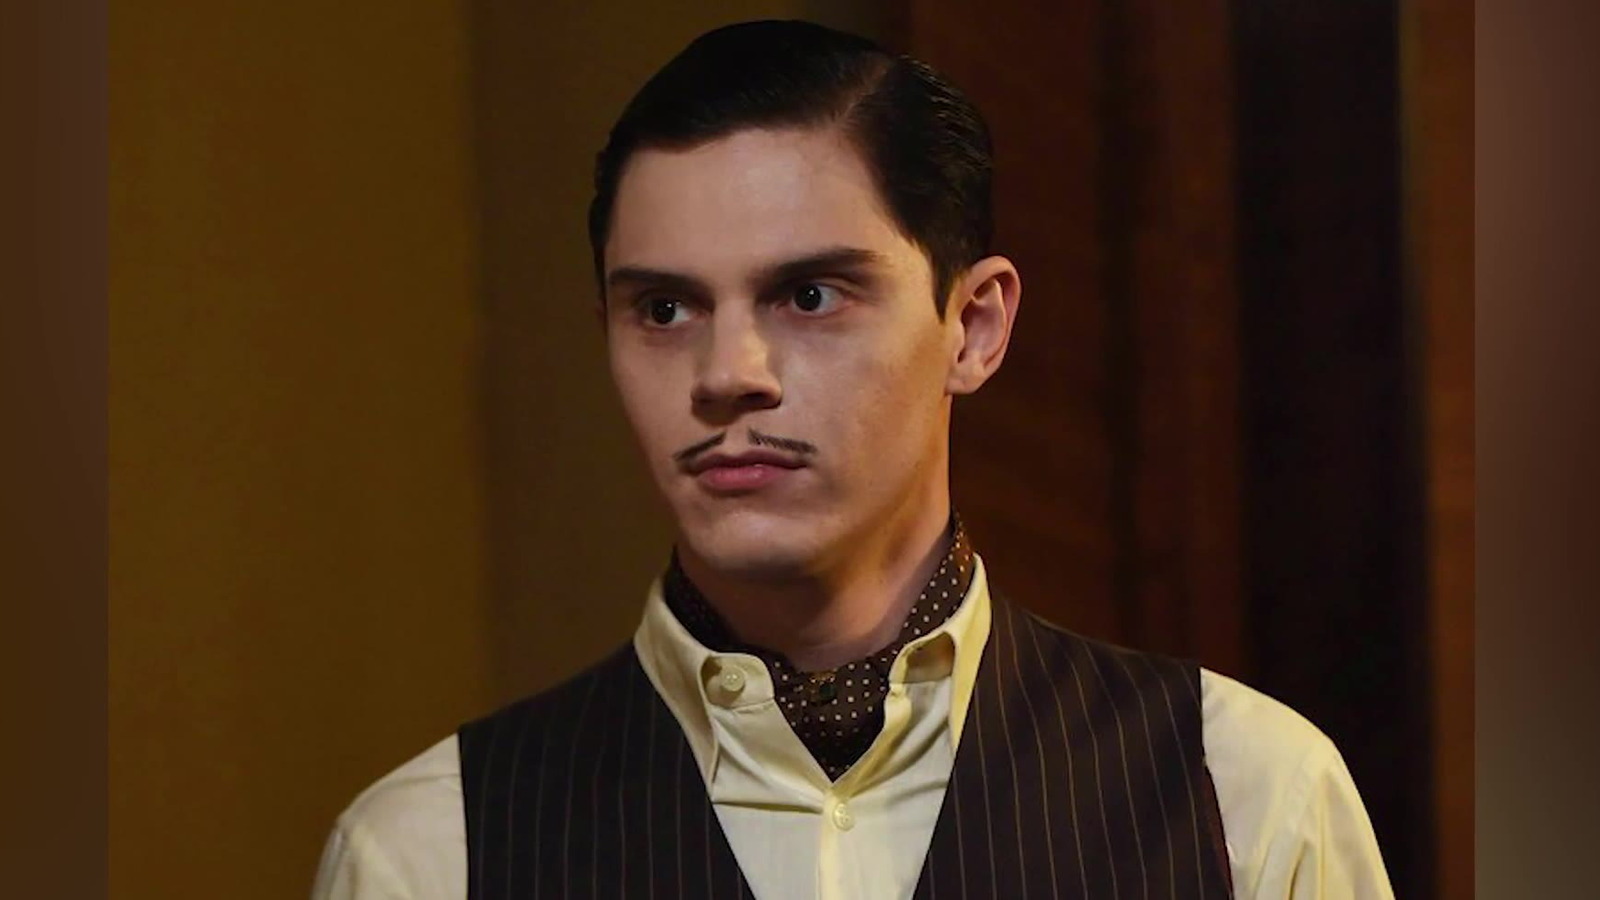 The AHS Theory That Connects Hotel's James March To Murder House